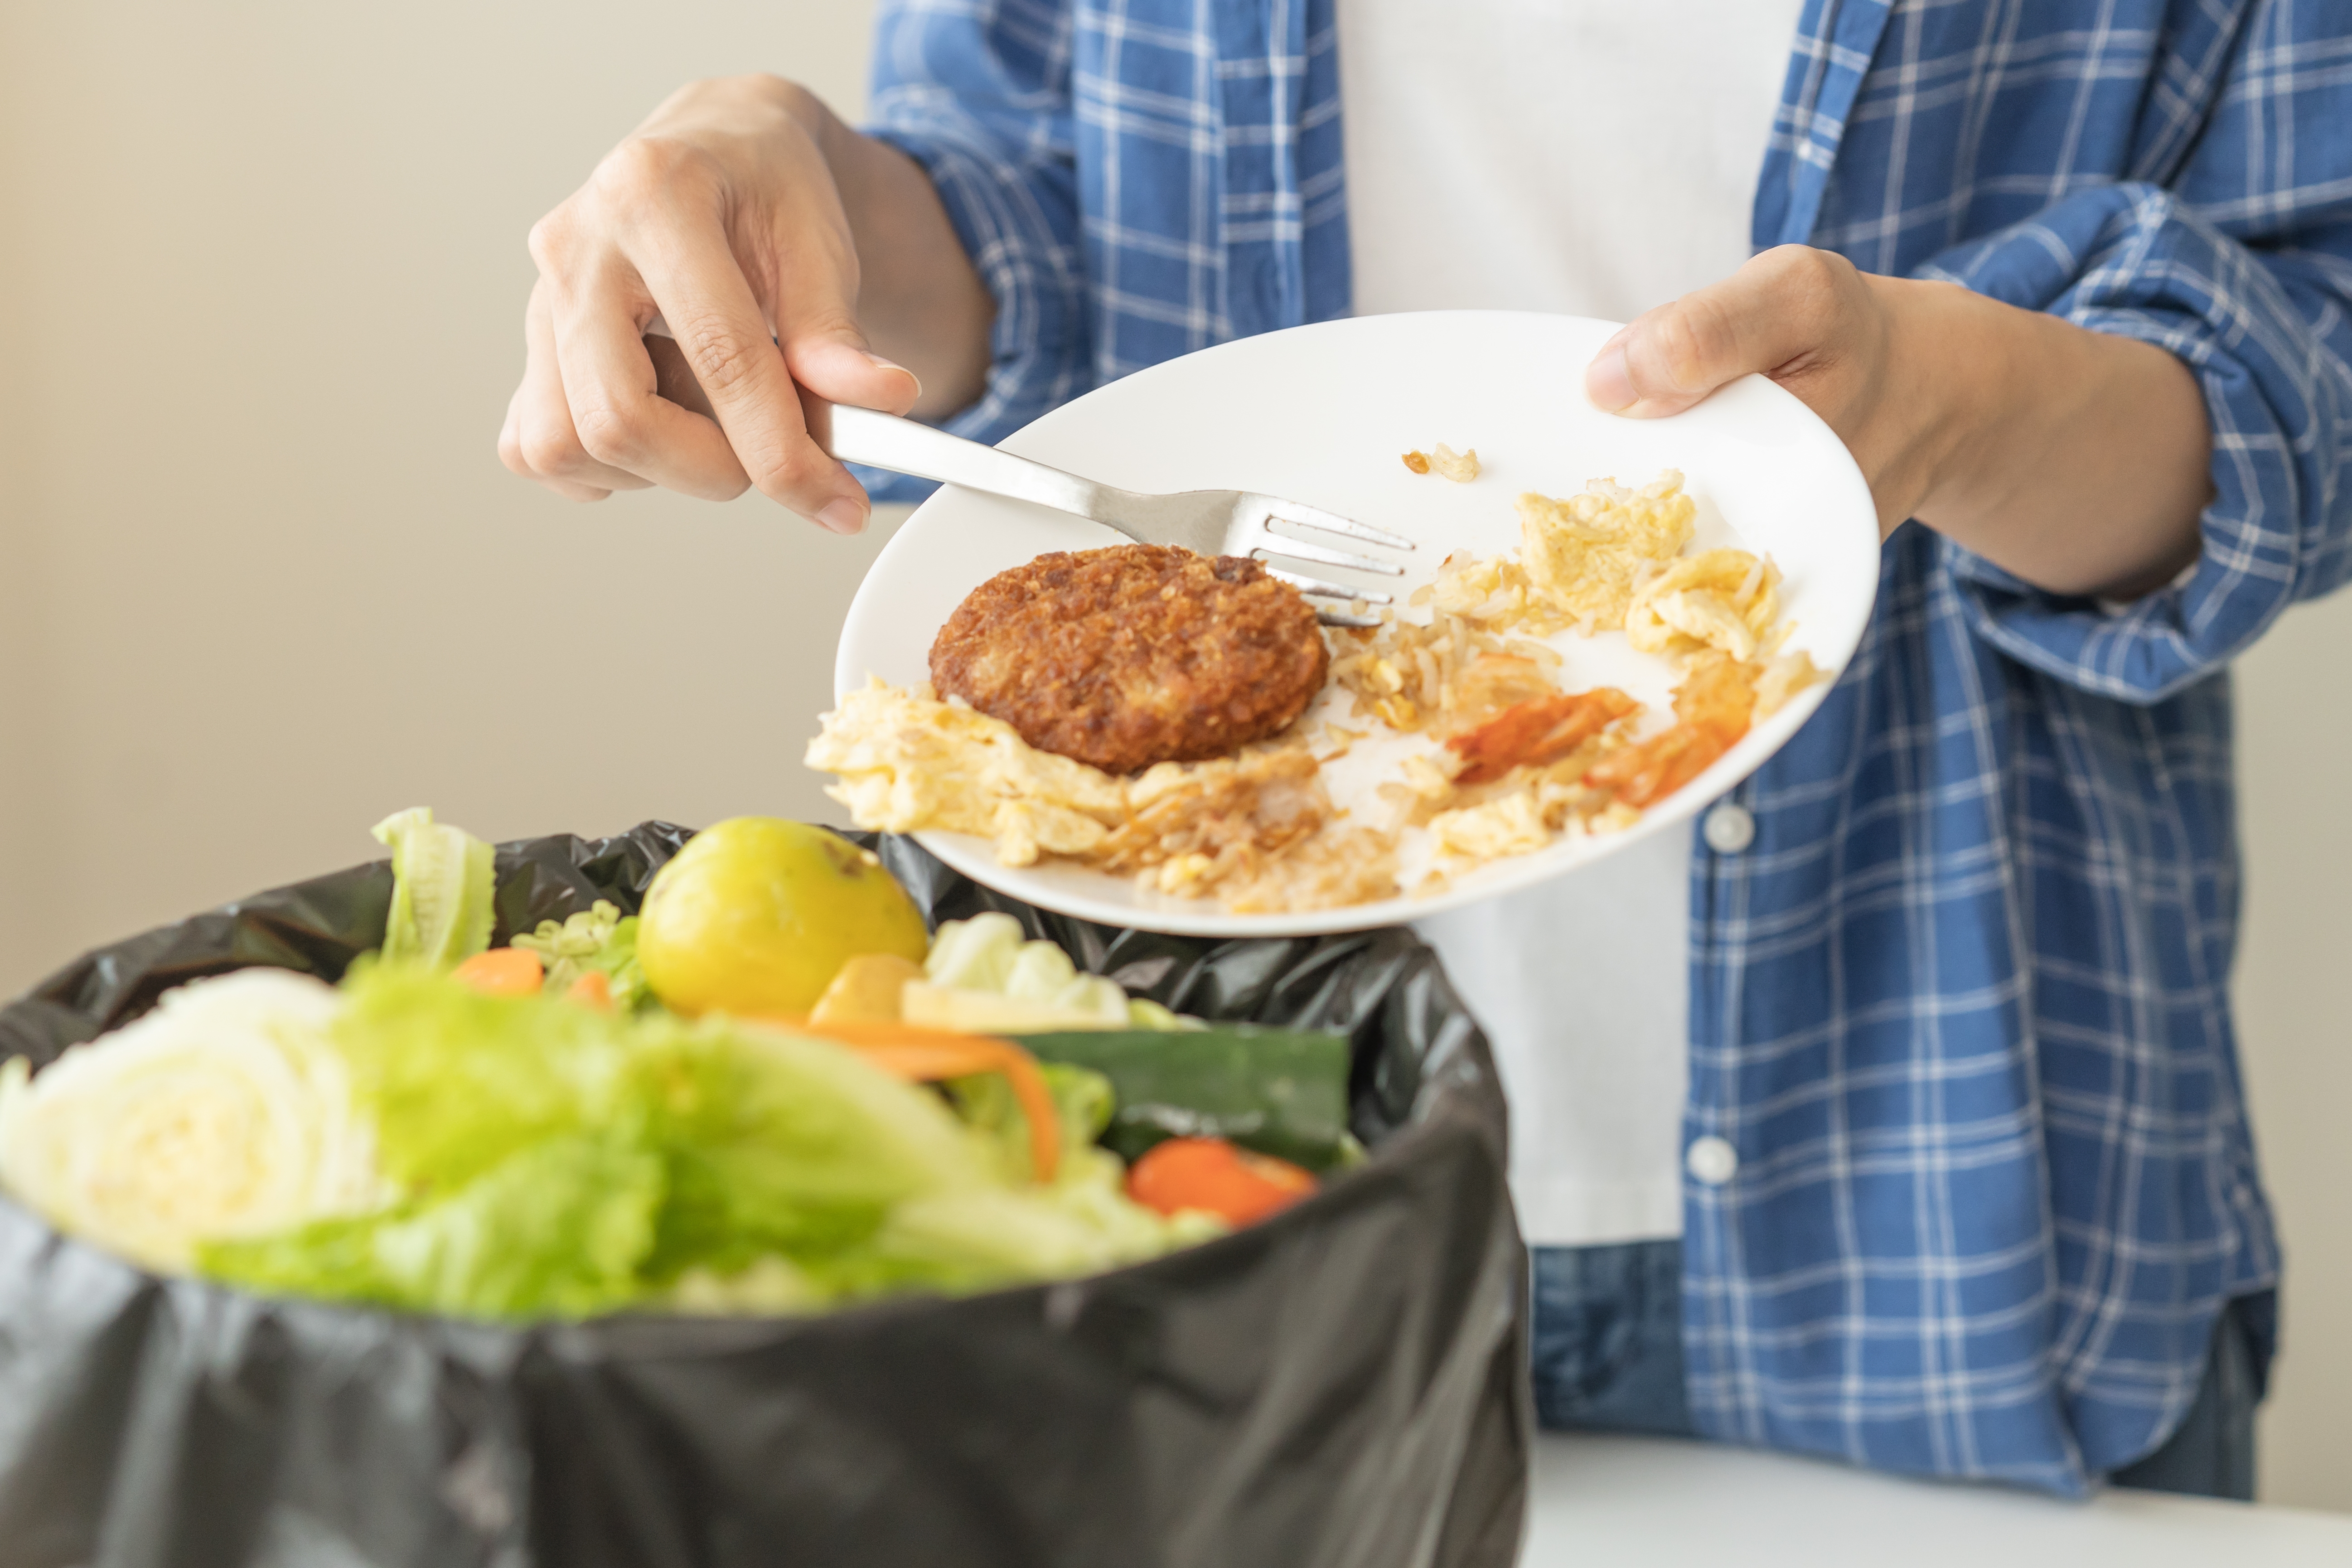 A man throwing food from a plate in the dustbin | Source: Shutterstock